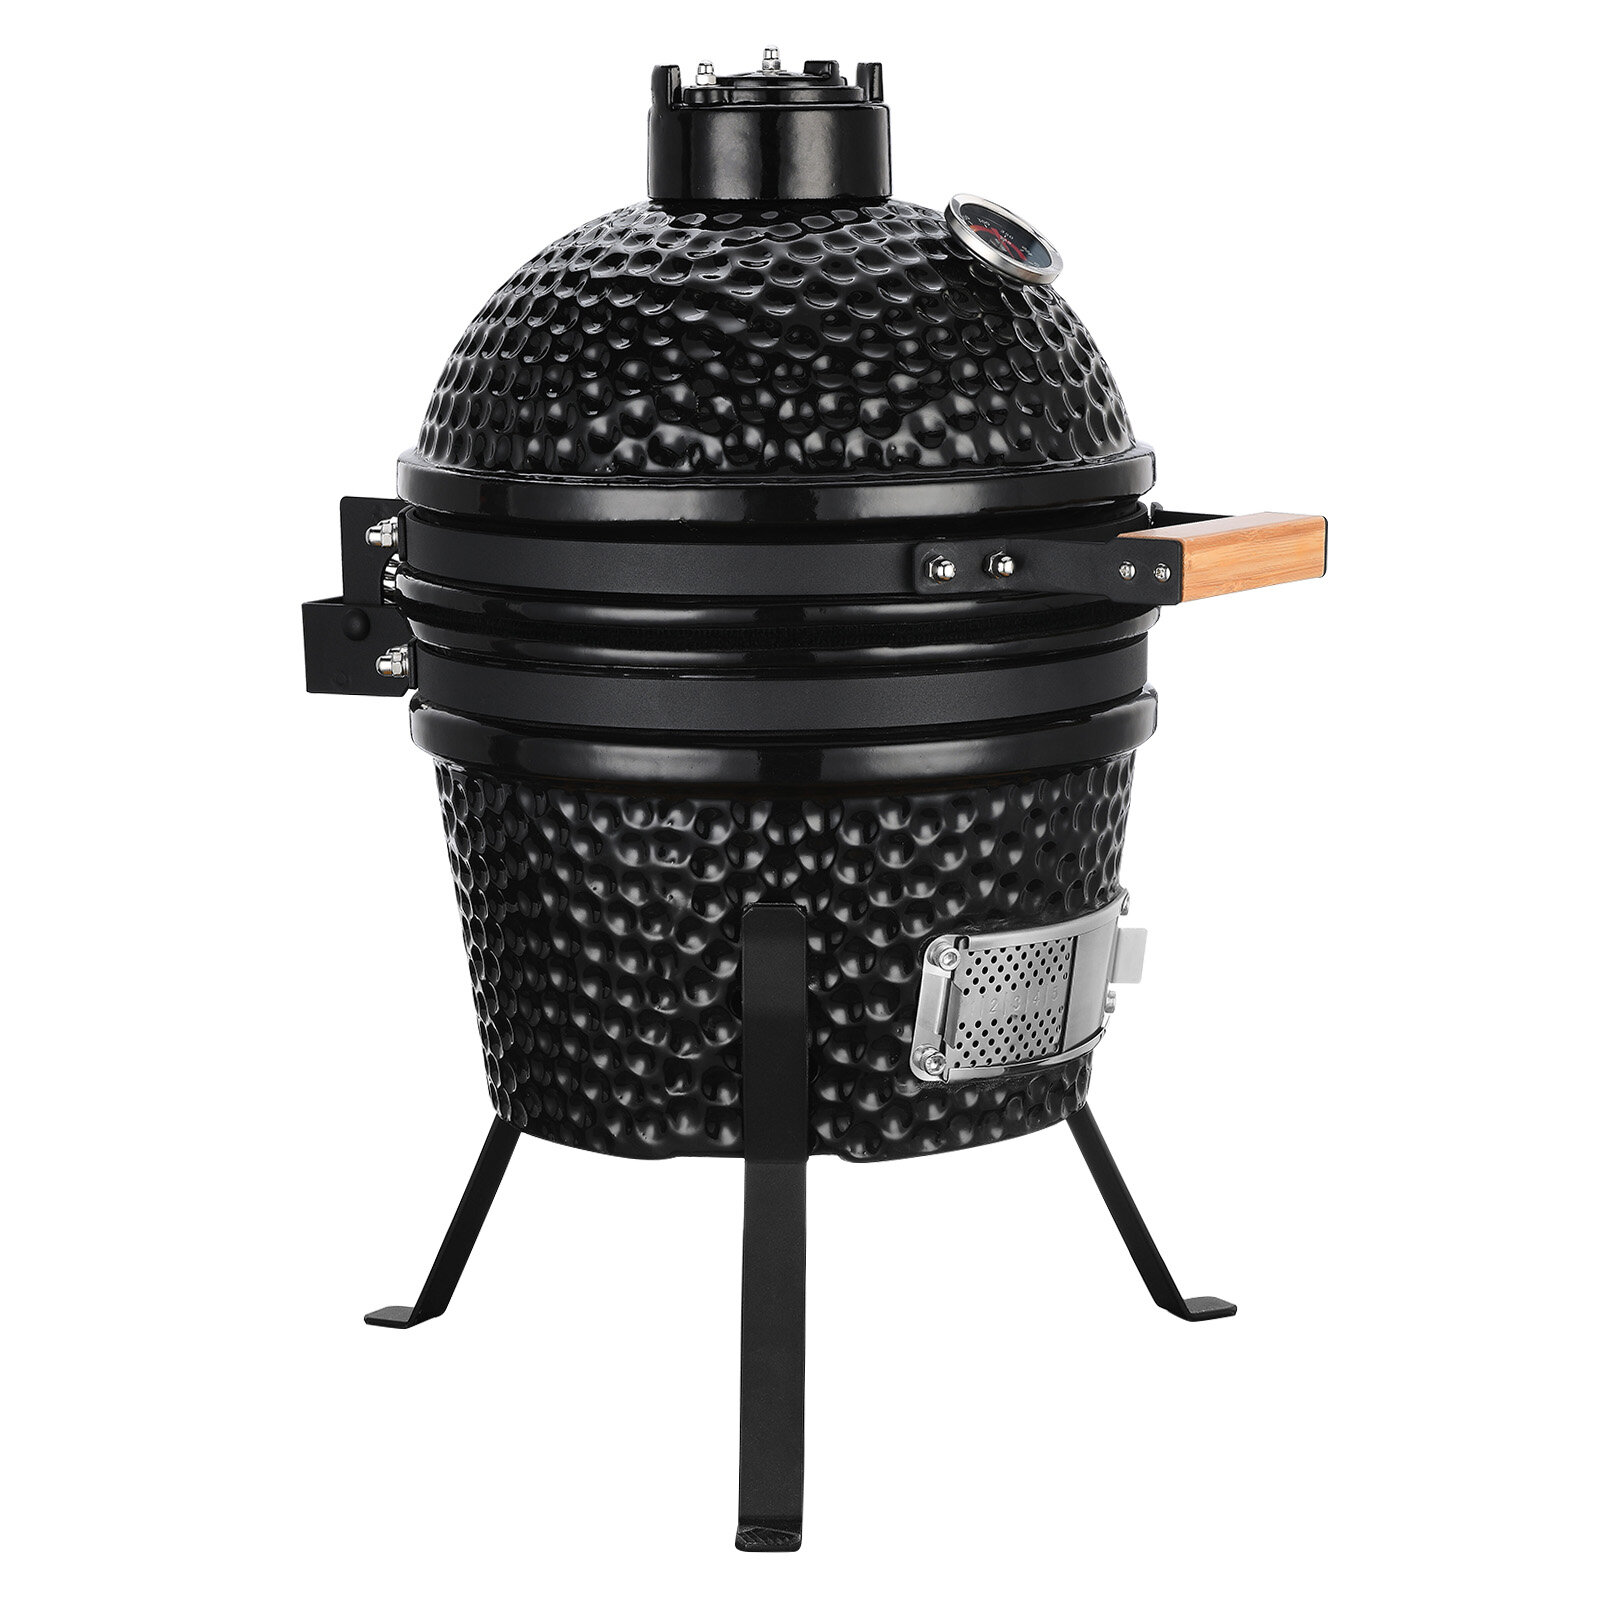 calcium lavender Book Healthomse 13 Inch Kamado Charcoal Grill, Roaster And Smoker. Bbq Grill,Multifunctional  Ceramic Barbecue Grill, Egg Mini Garden Outdoor Portable Kitchen Style,  Without Side Table For Bbq, Camping And Picnic, Black | Wayfair